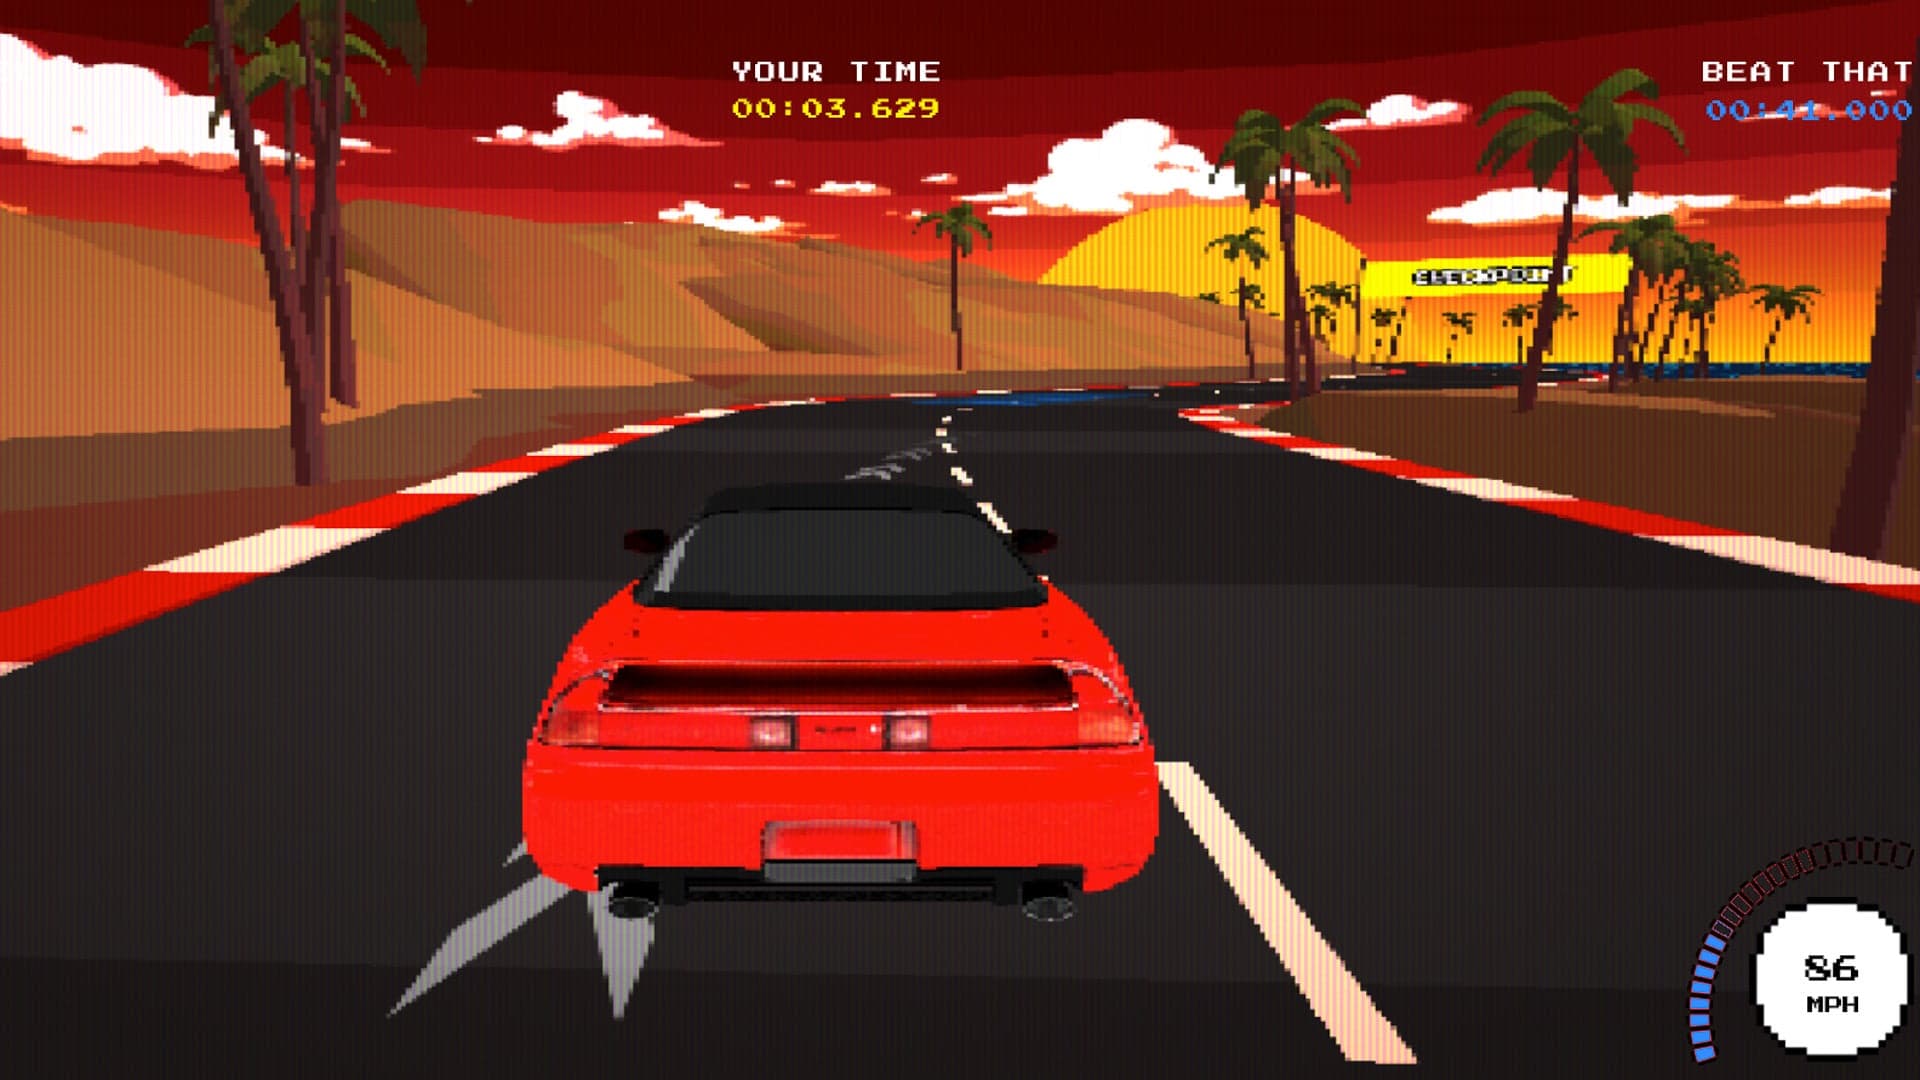 8-Bit and Glossy Acuras Race Against Each Other In Beat That Racing Game